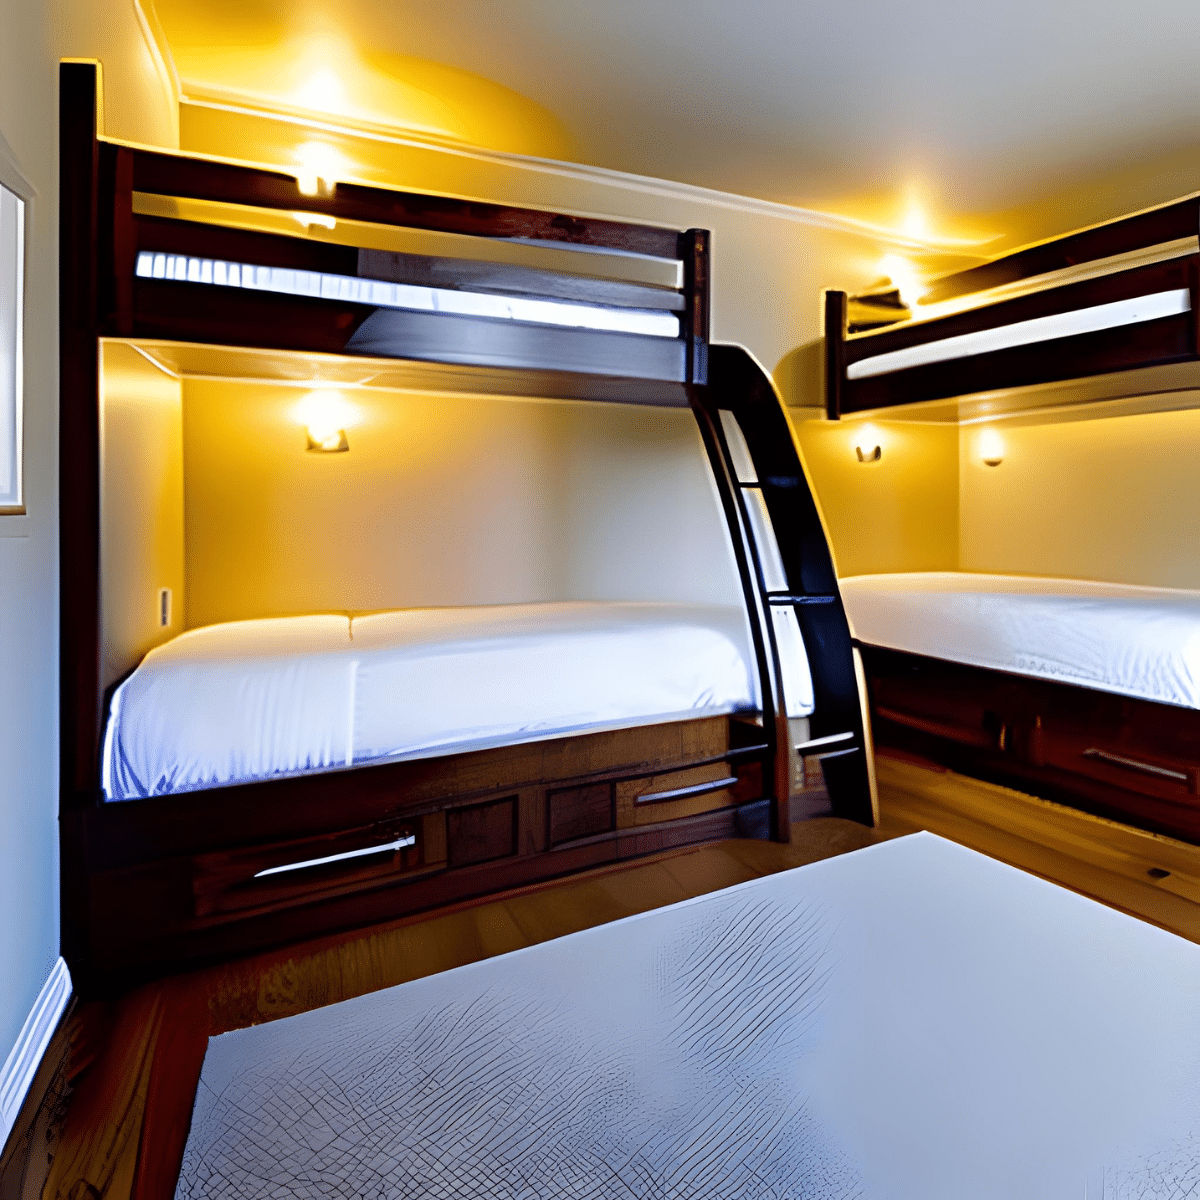 two bunk beds with wall lights installed in each bunk